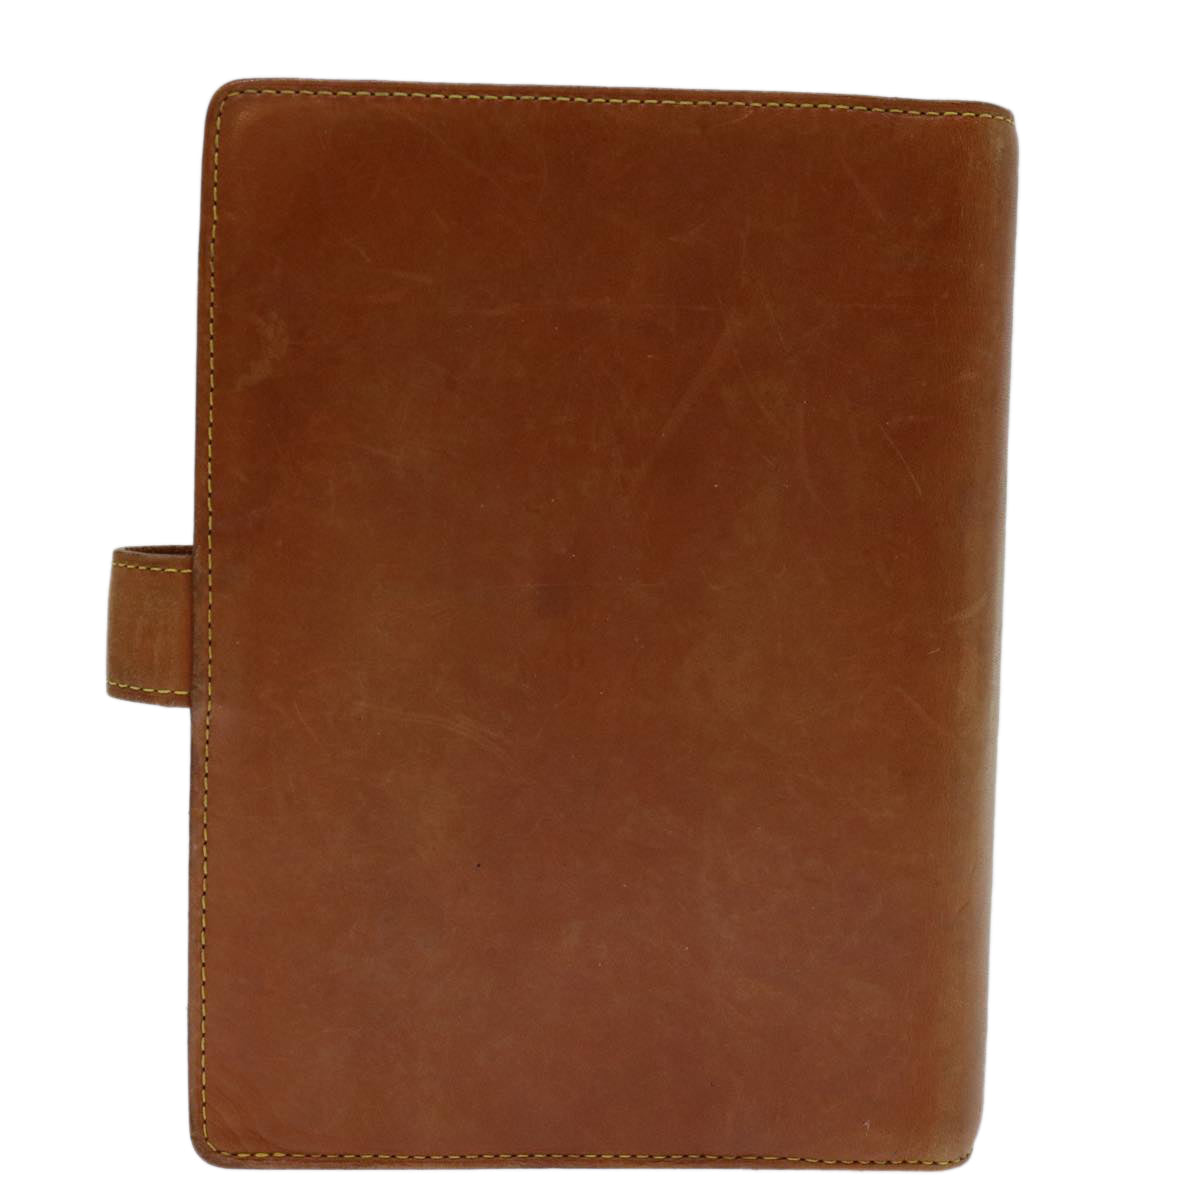 LOUIS VUITTON Nomad Leather Agenda MM Day Planner Cover Beige R20473 Auth 69494 - 0